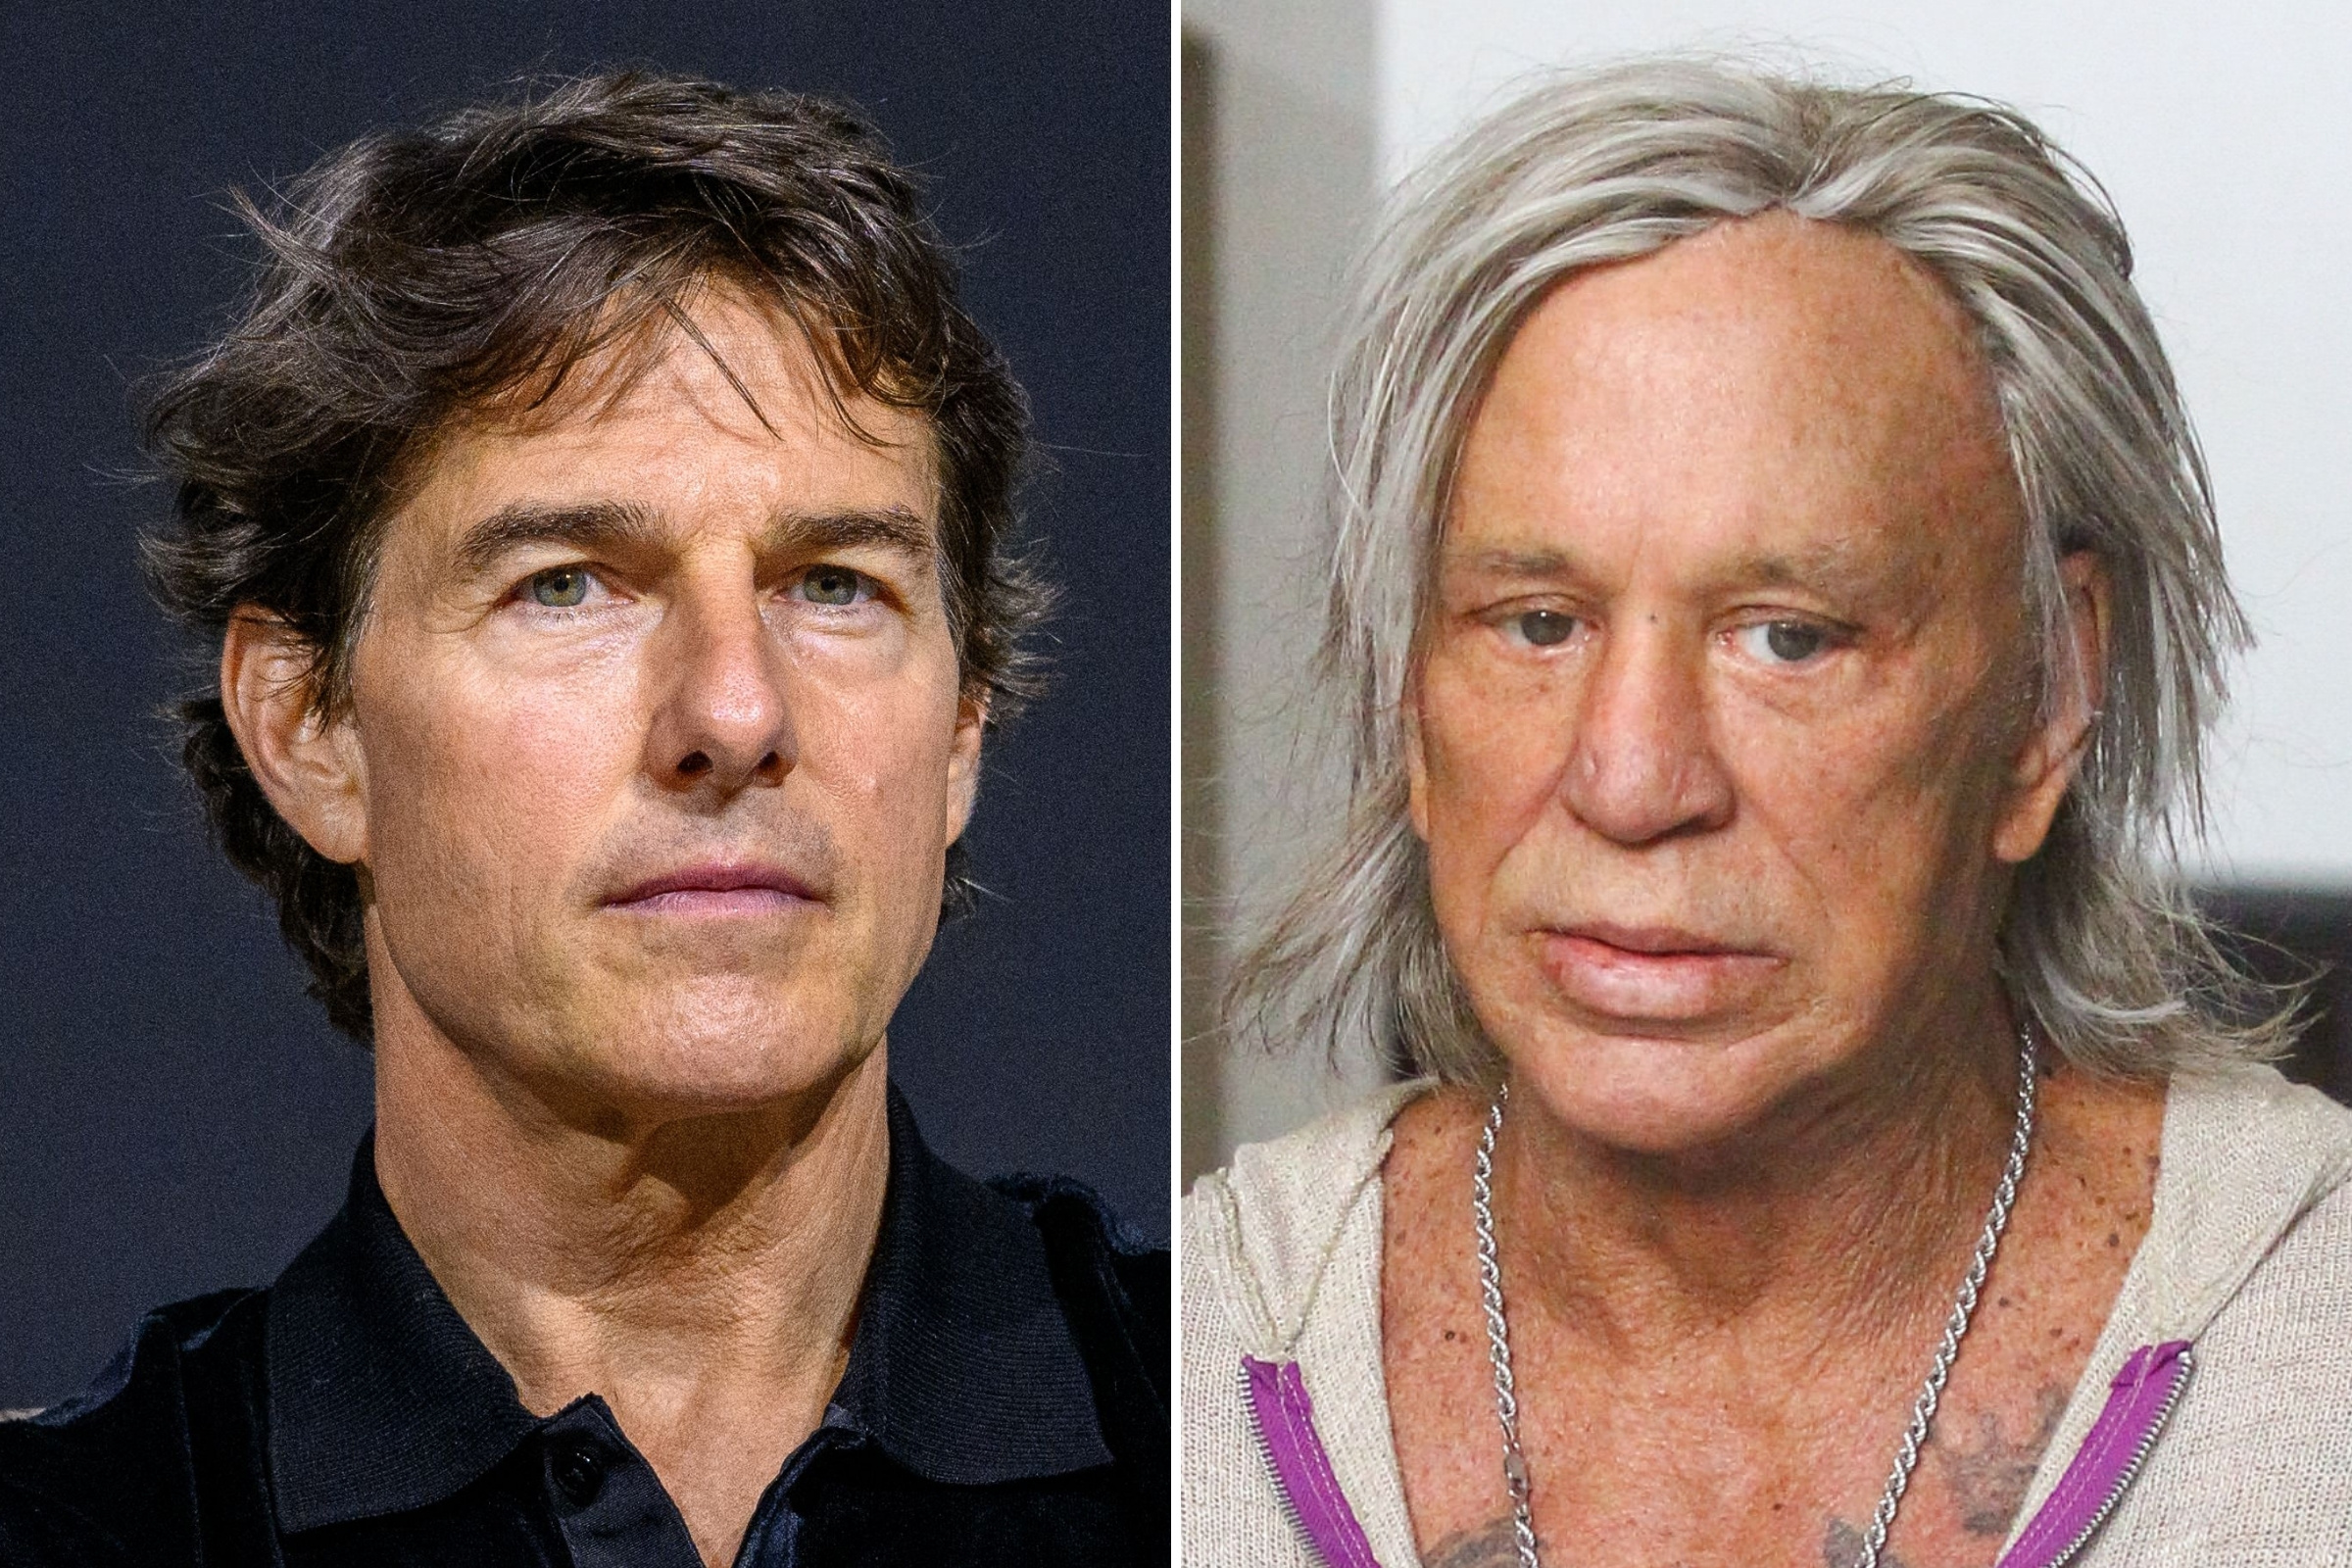 Mickey Rourke Calls Tom Cruise 'Irrelevant'—'Doesn't Mean S*** To Me'